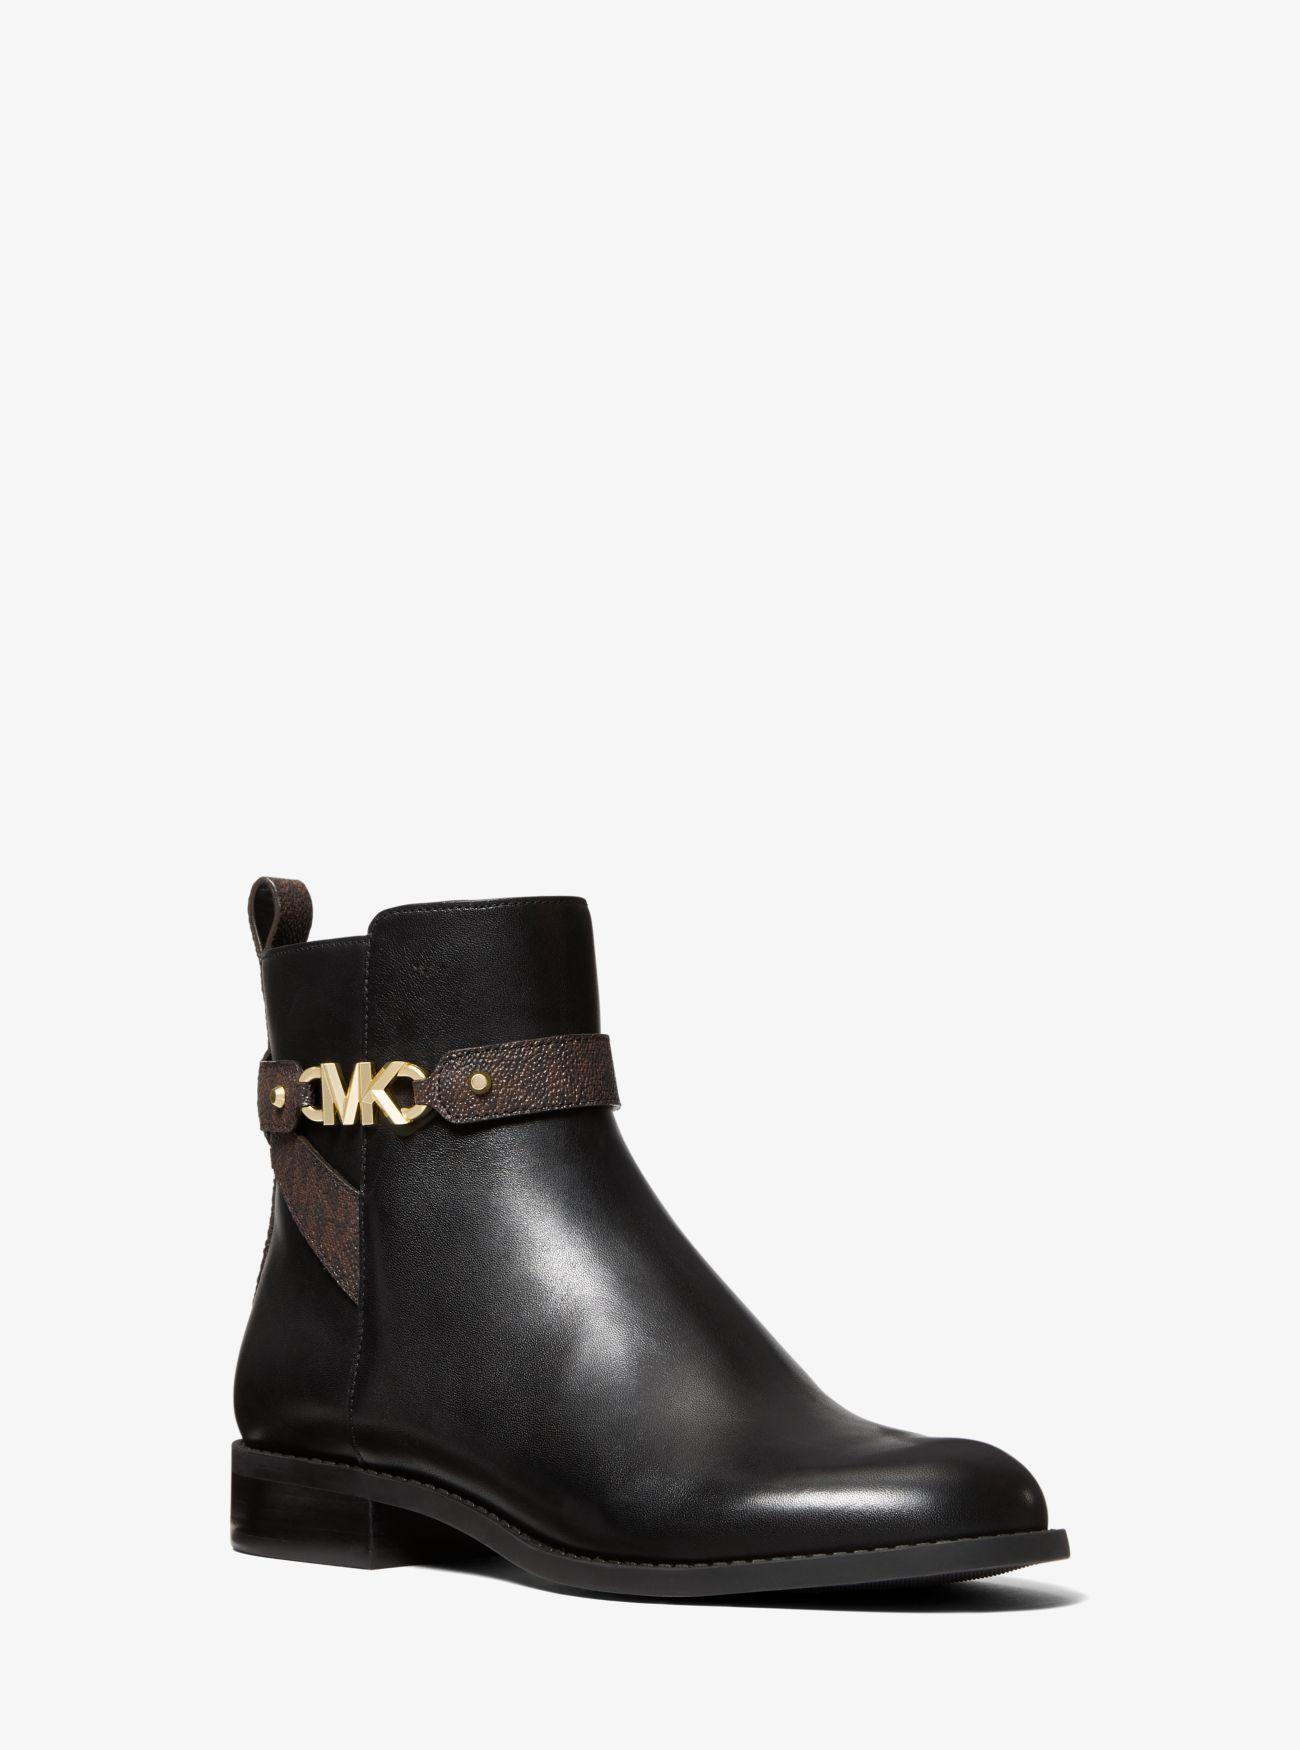 Michael Kors Farrah Leather And Logo Ankle Boot in Black | Lyst UK